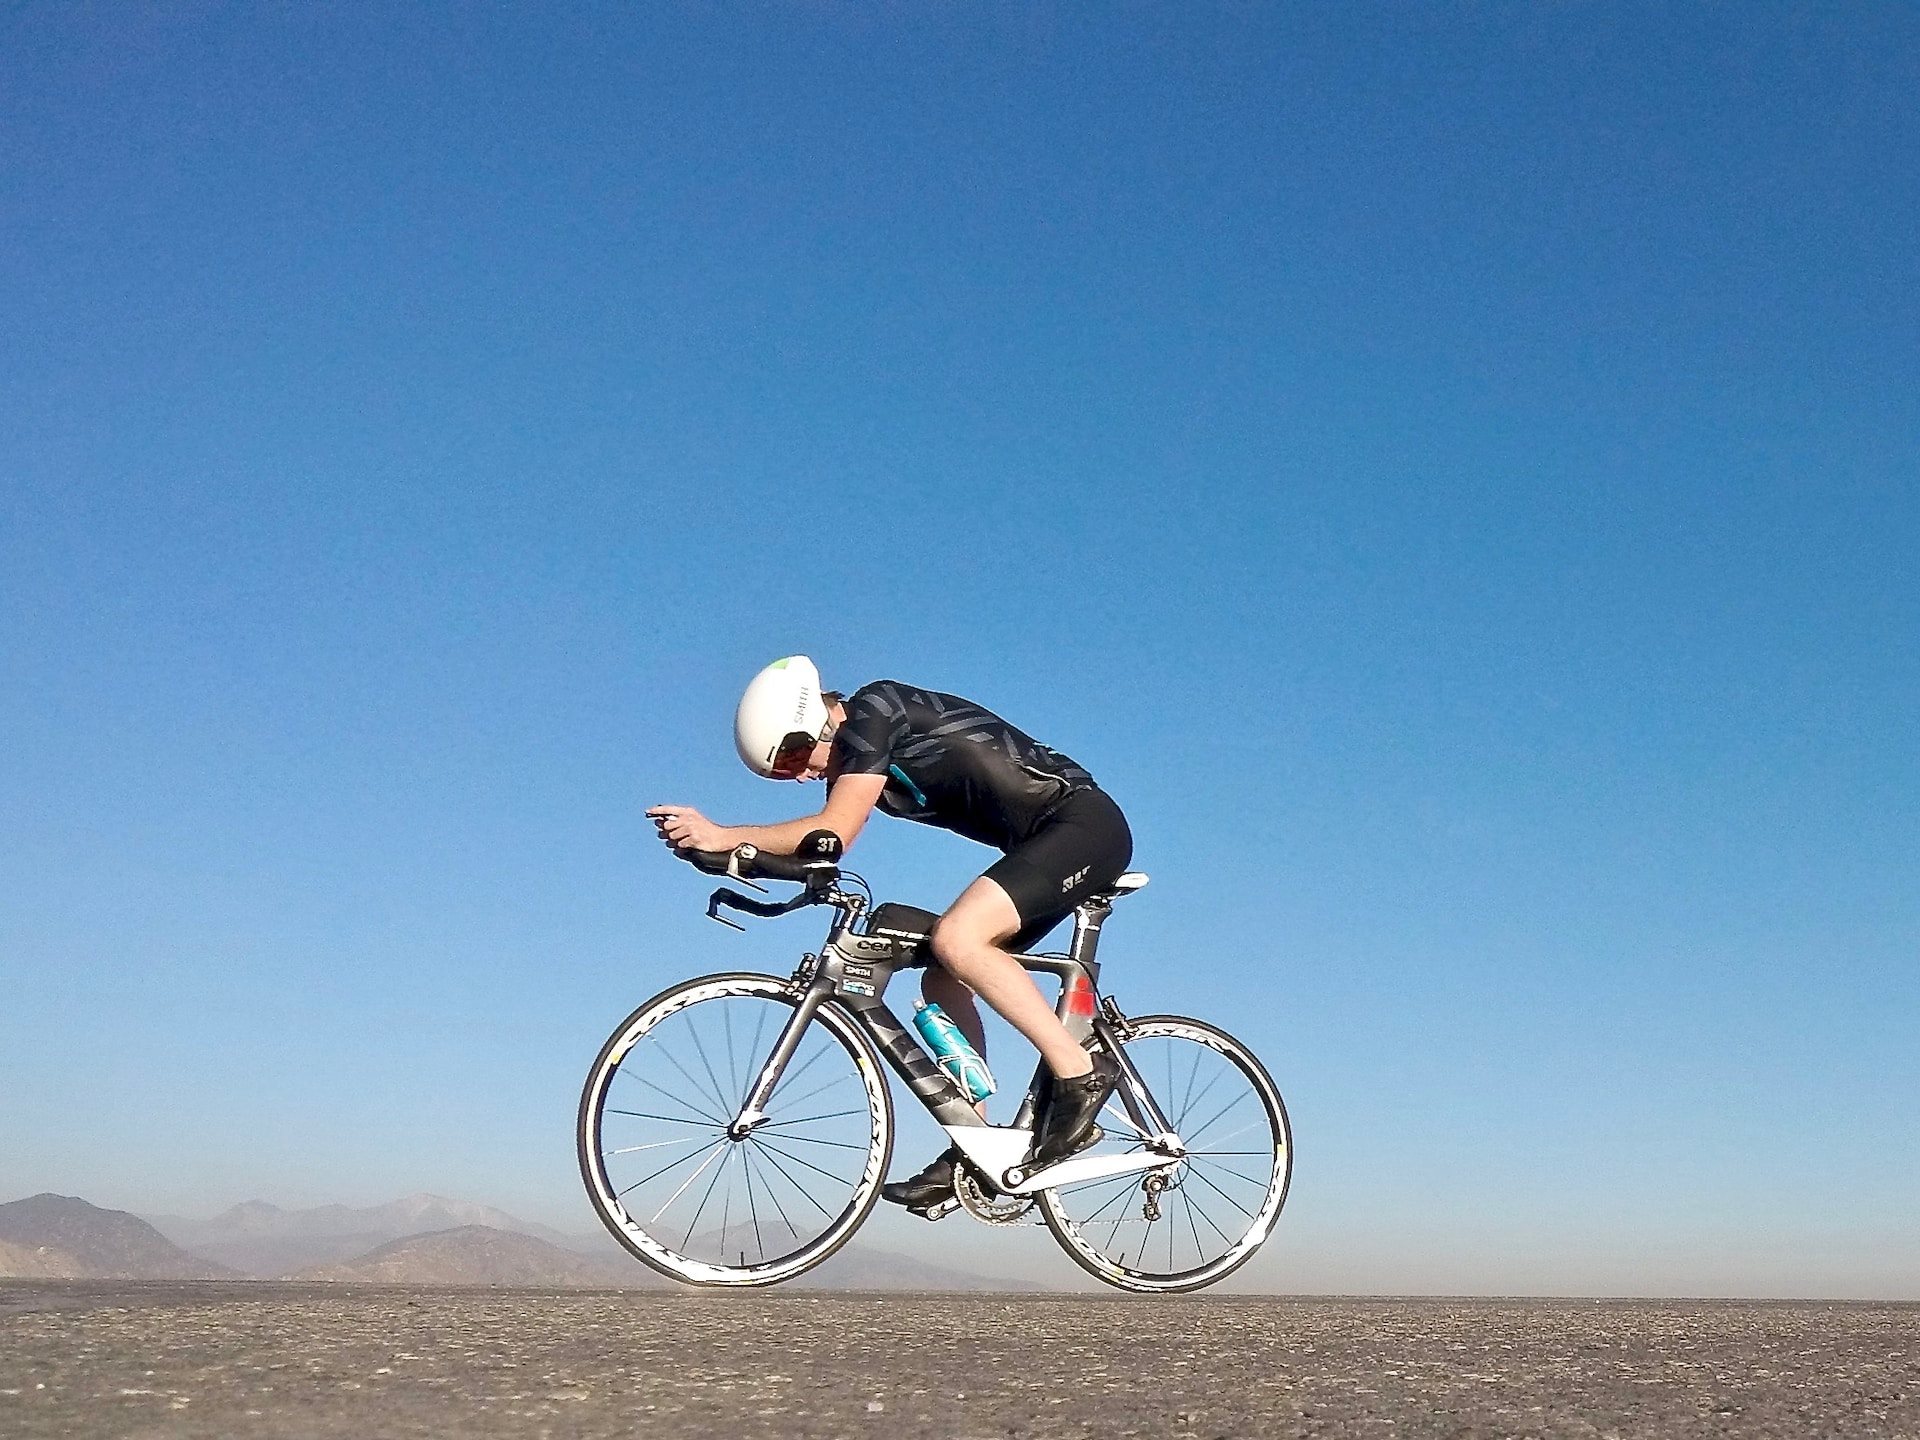 this image shows a male athlete doing bicycling triathlon